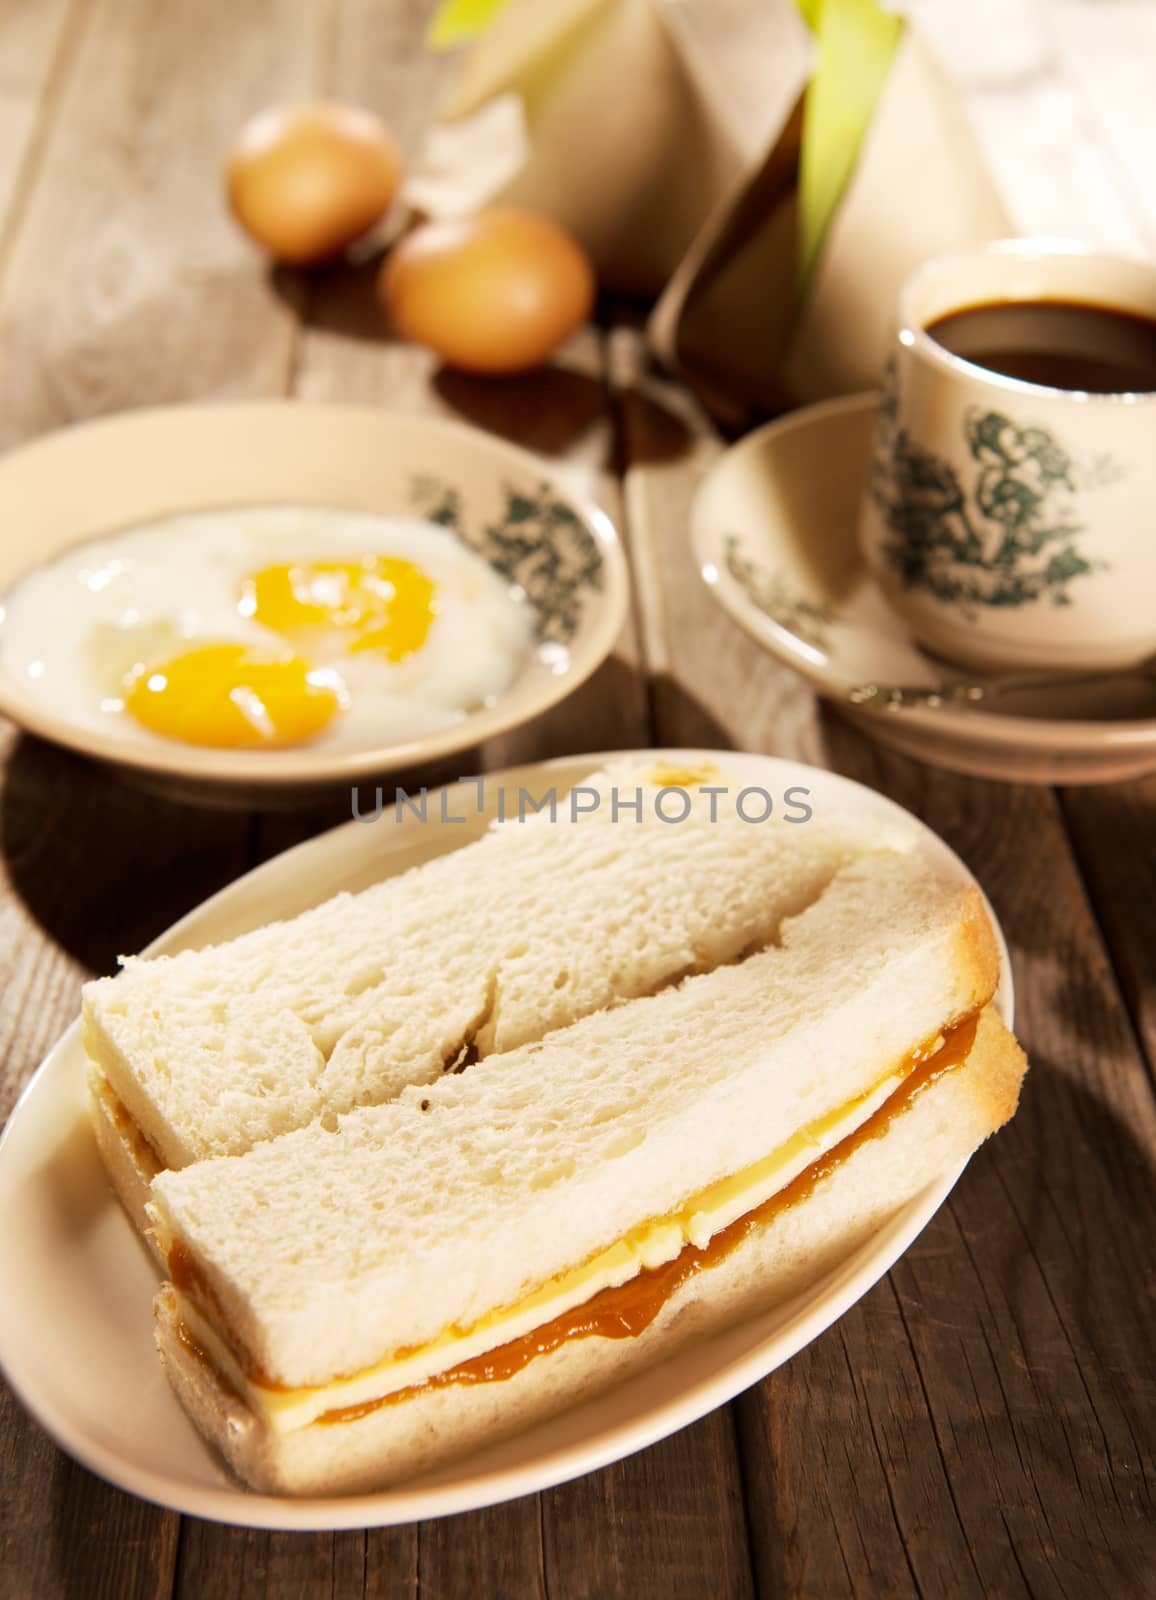 Traditional Malaysian style breakfast, kaya butter toast, nasi lemak and boiled eggs with coffee. Fractal on the cup is generic print. Soft focus setting with dramatic ambient light on dark wooden background.